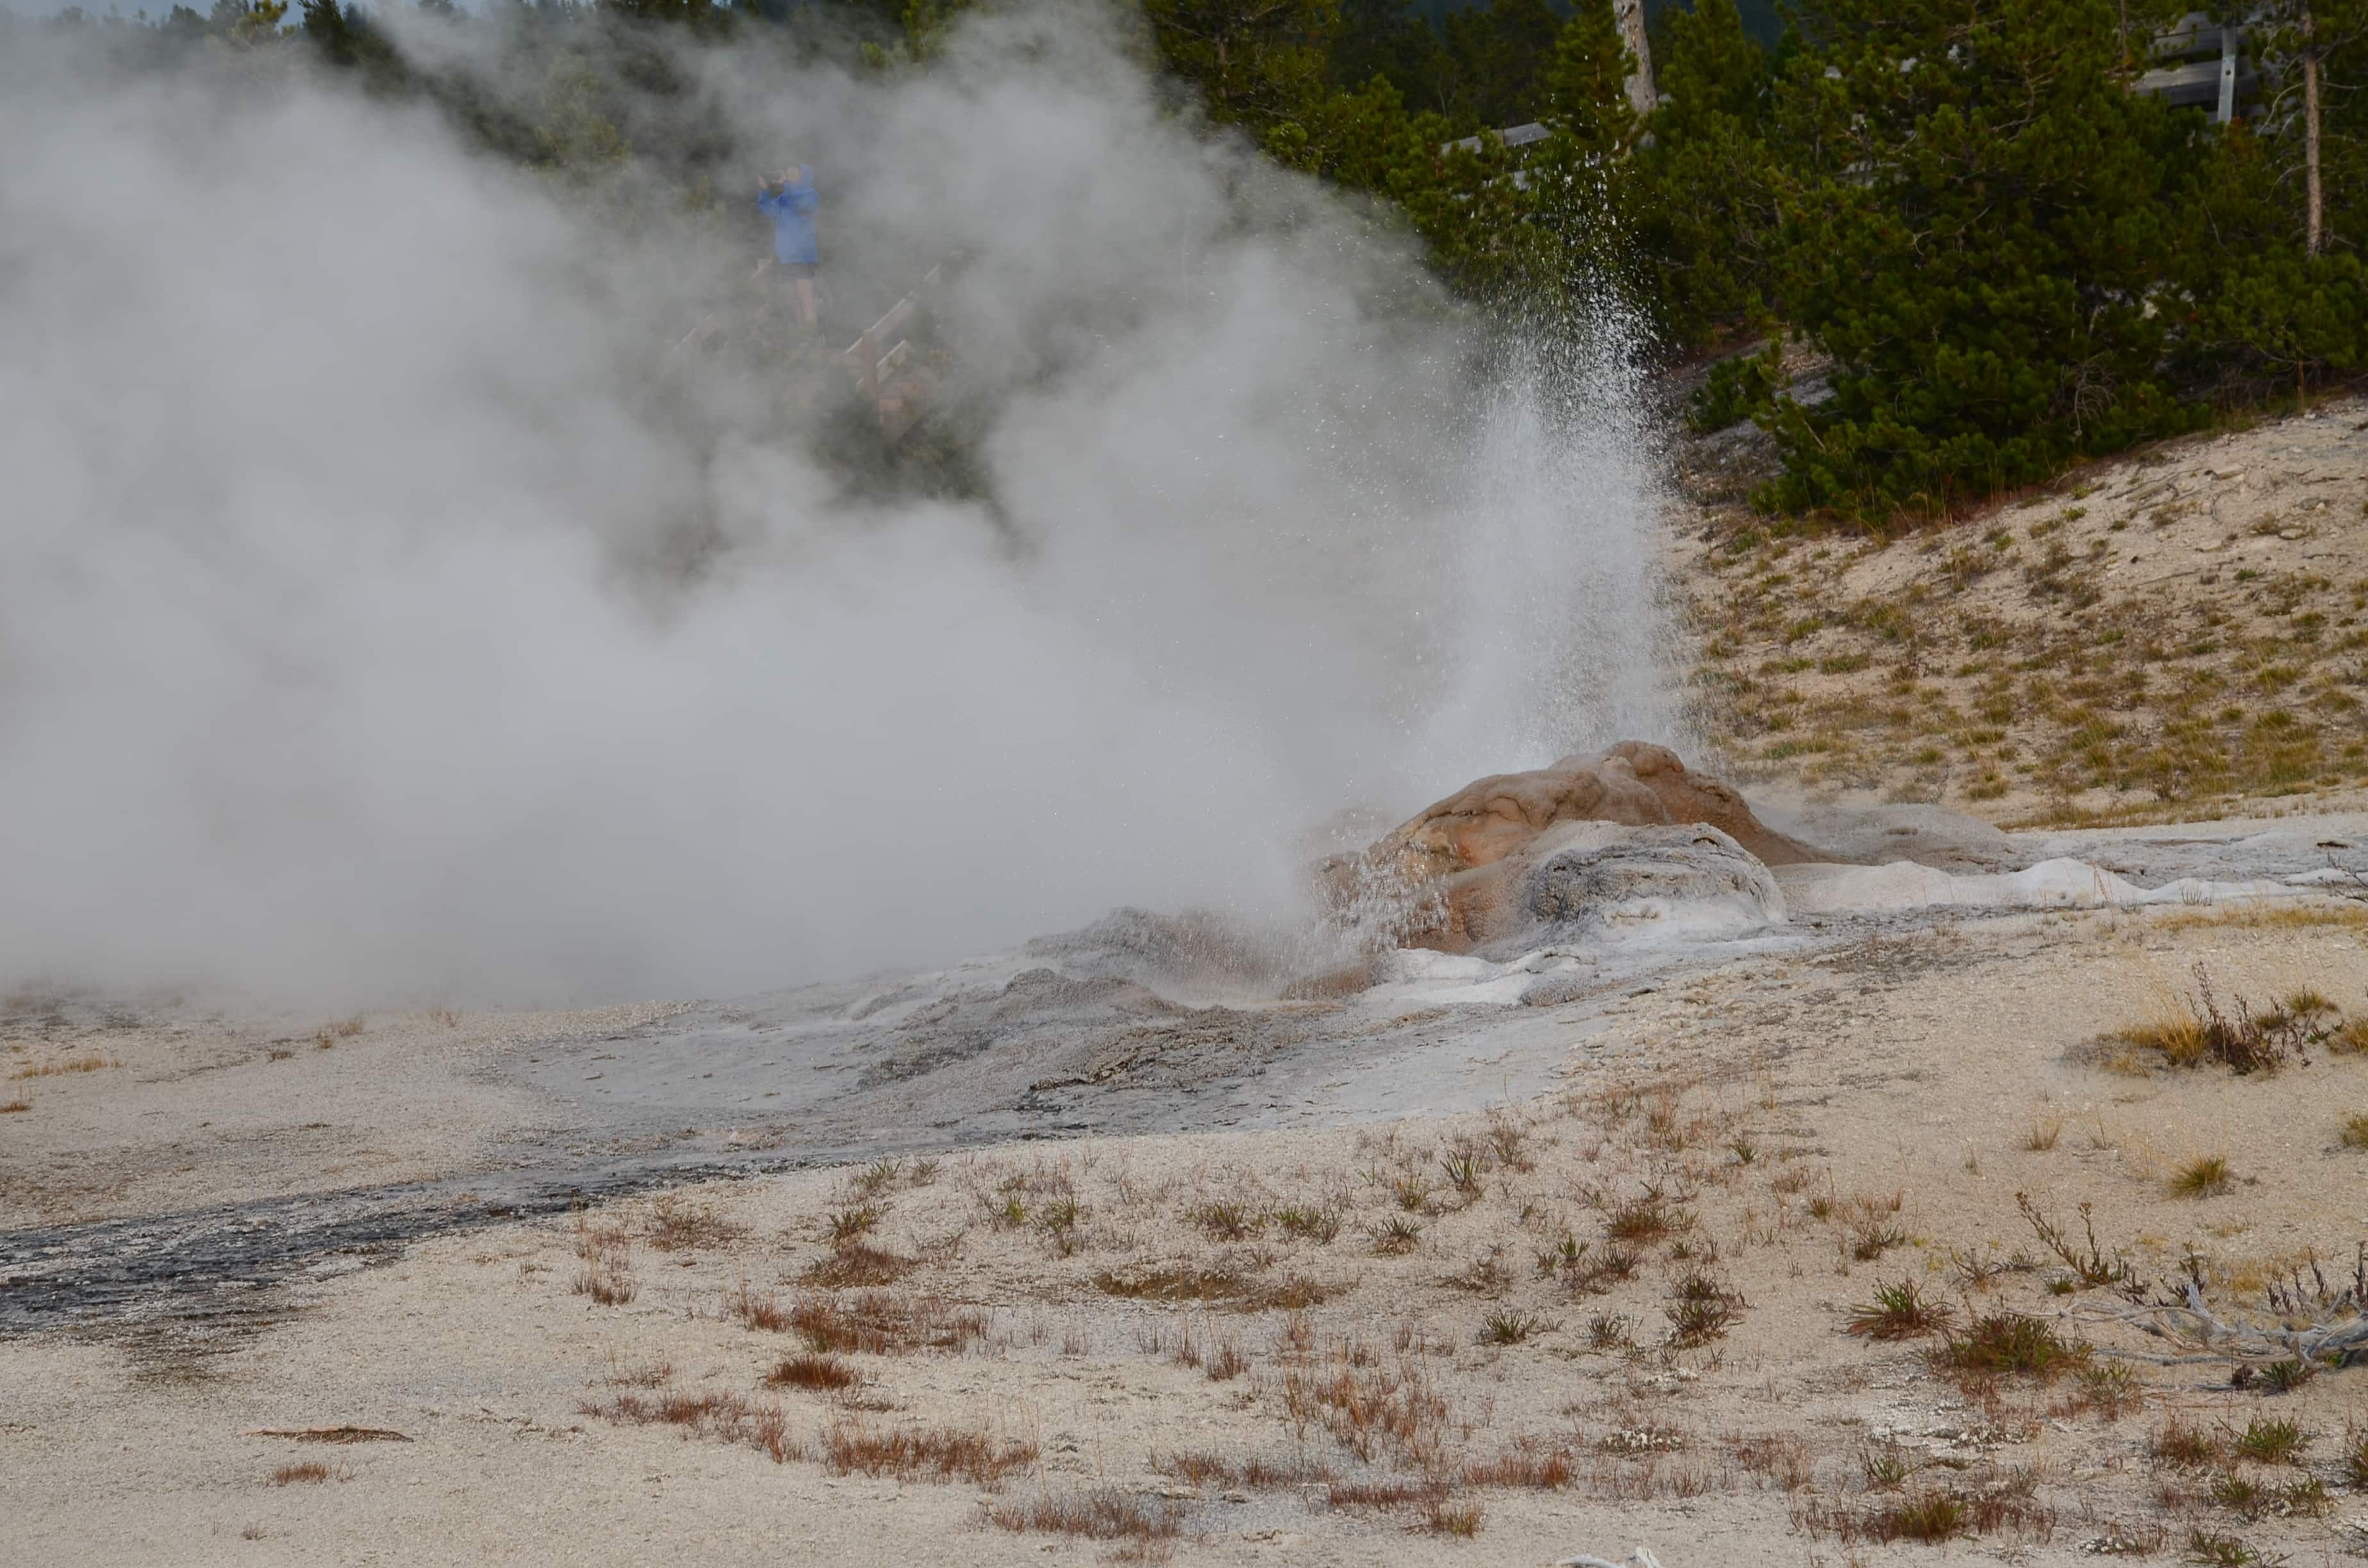 Jet Geyser at the Lower Geyser Basin in Yellowstone National Park, Wyoming